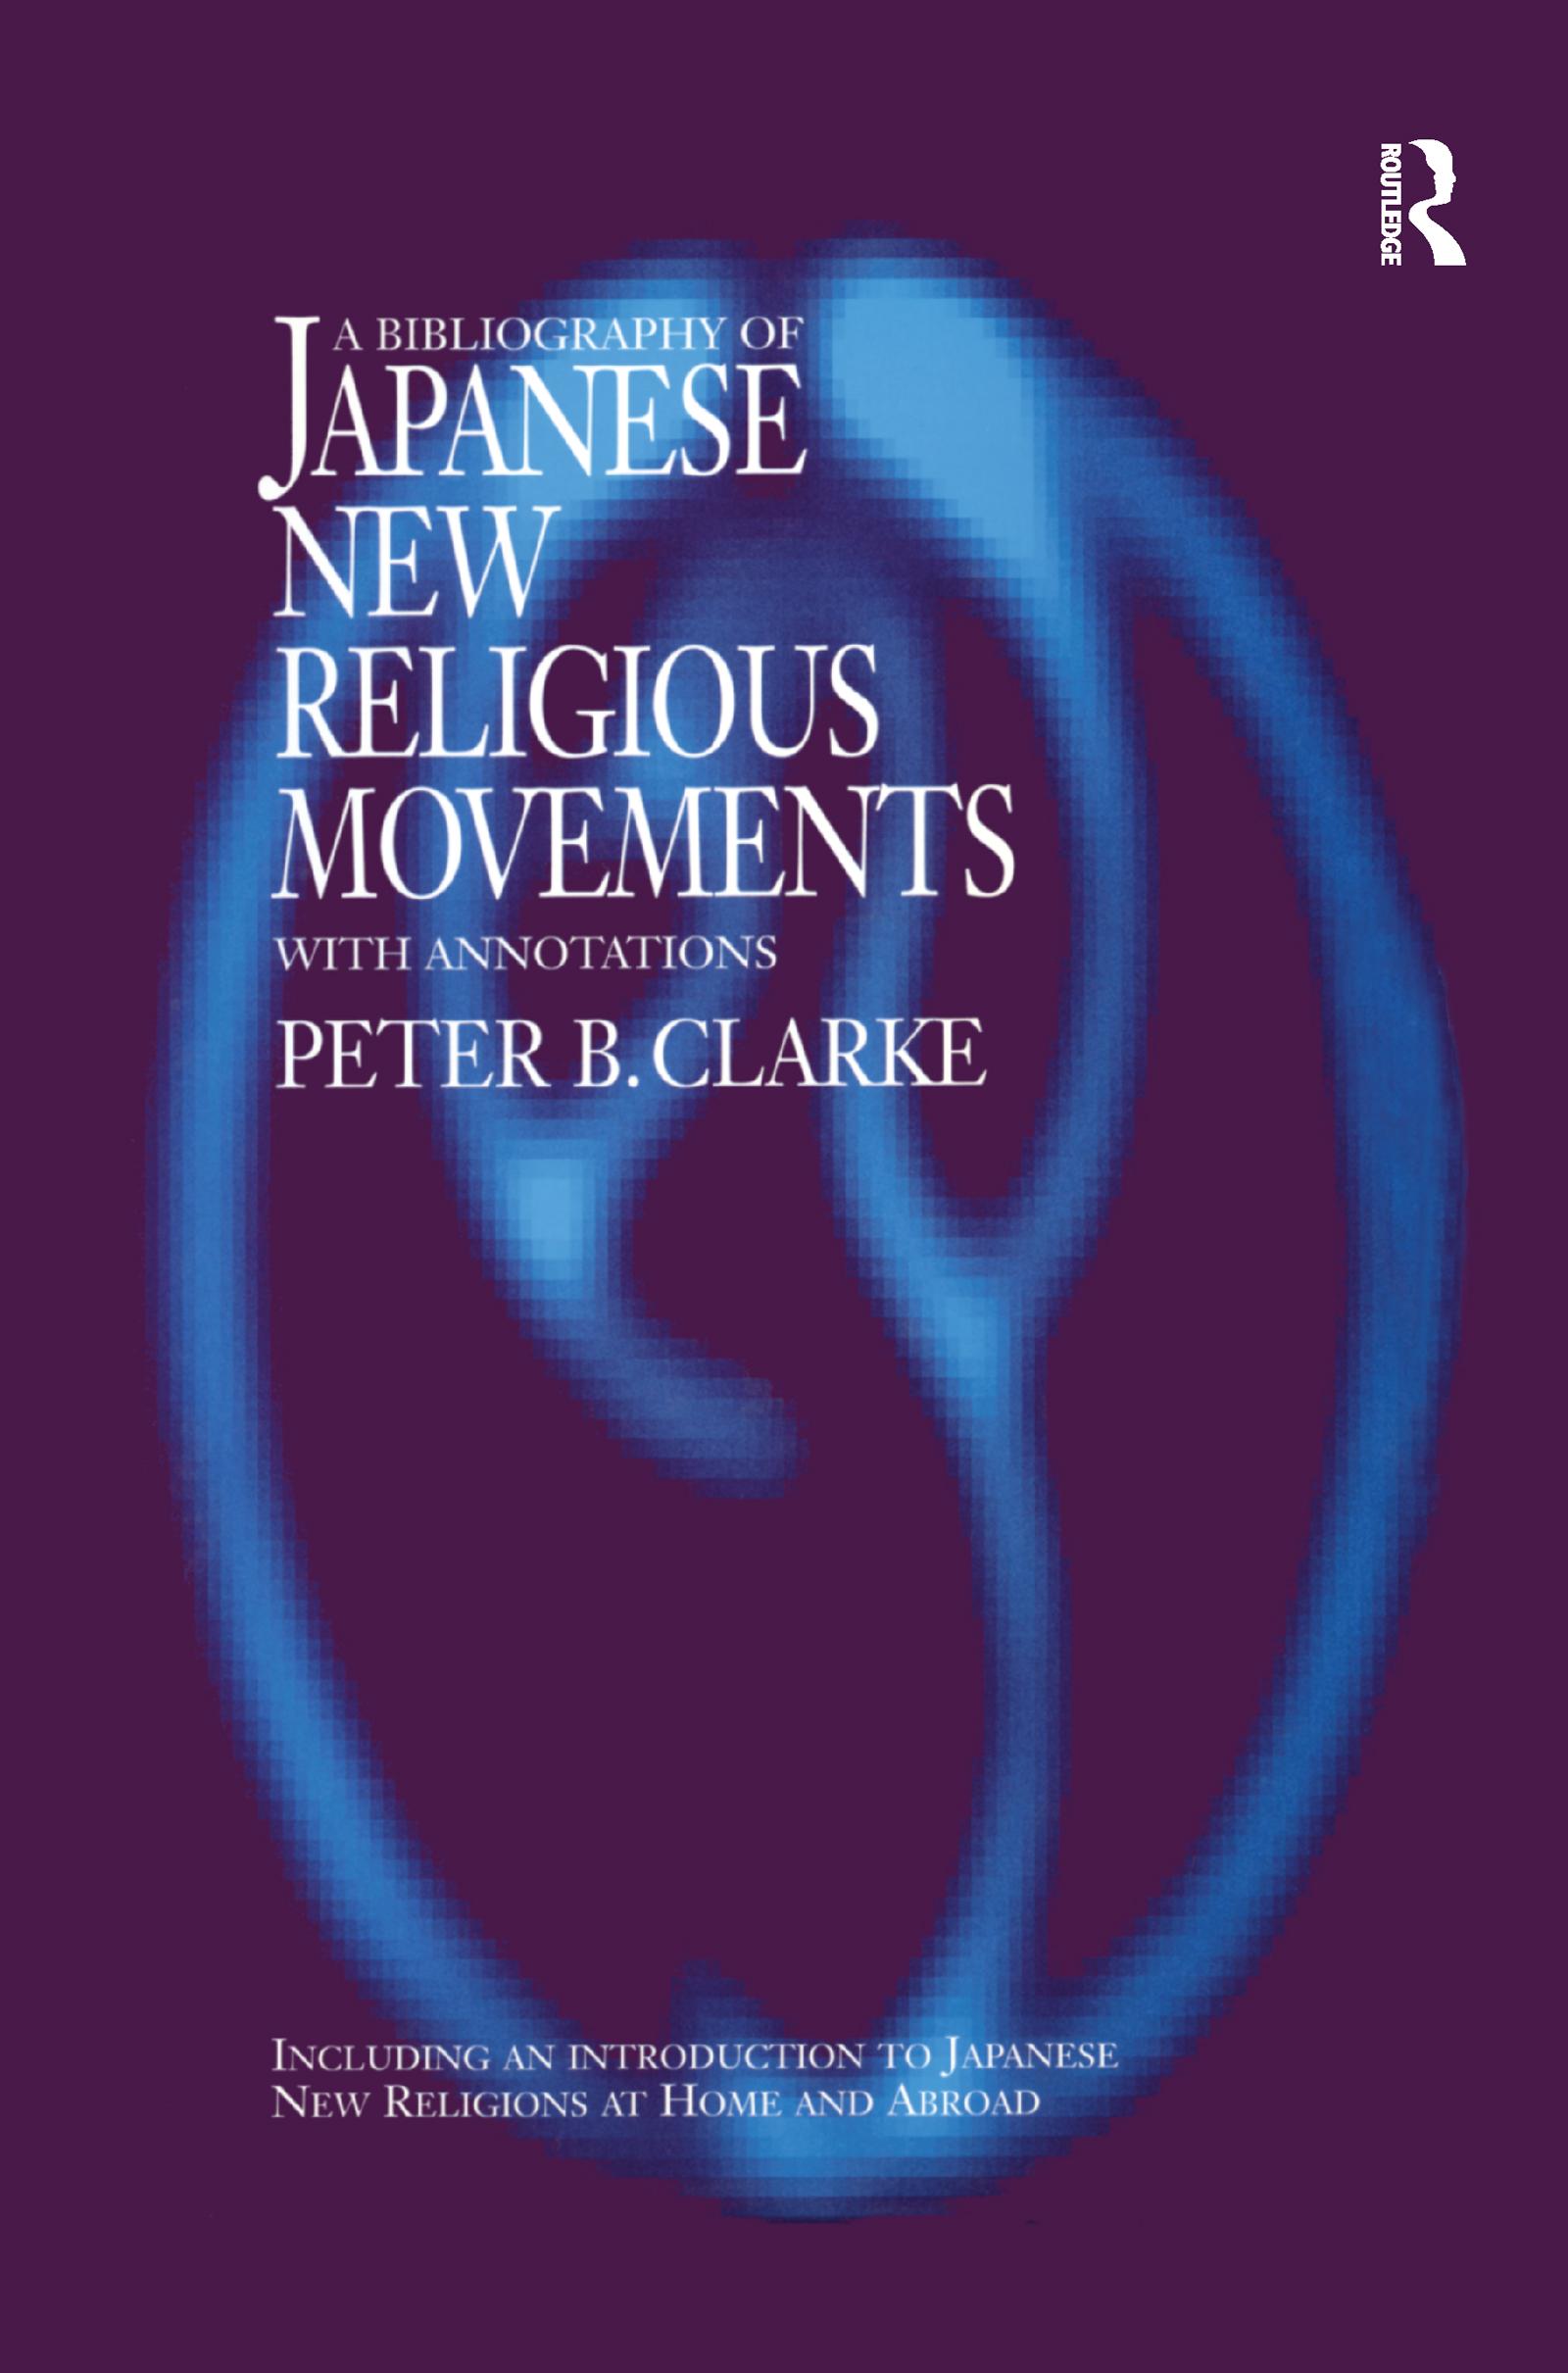 Clarke, P: Bibliography of Japanese New Religious Movements - Peter B Clarke (King's College, London and University of Oxford, UK)